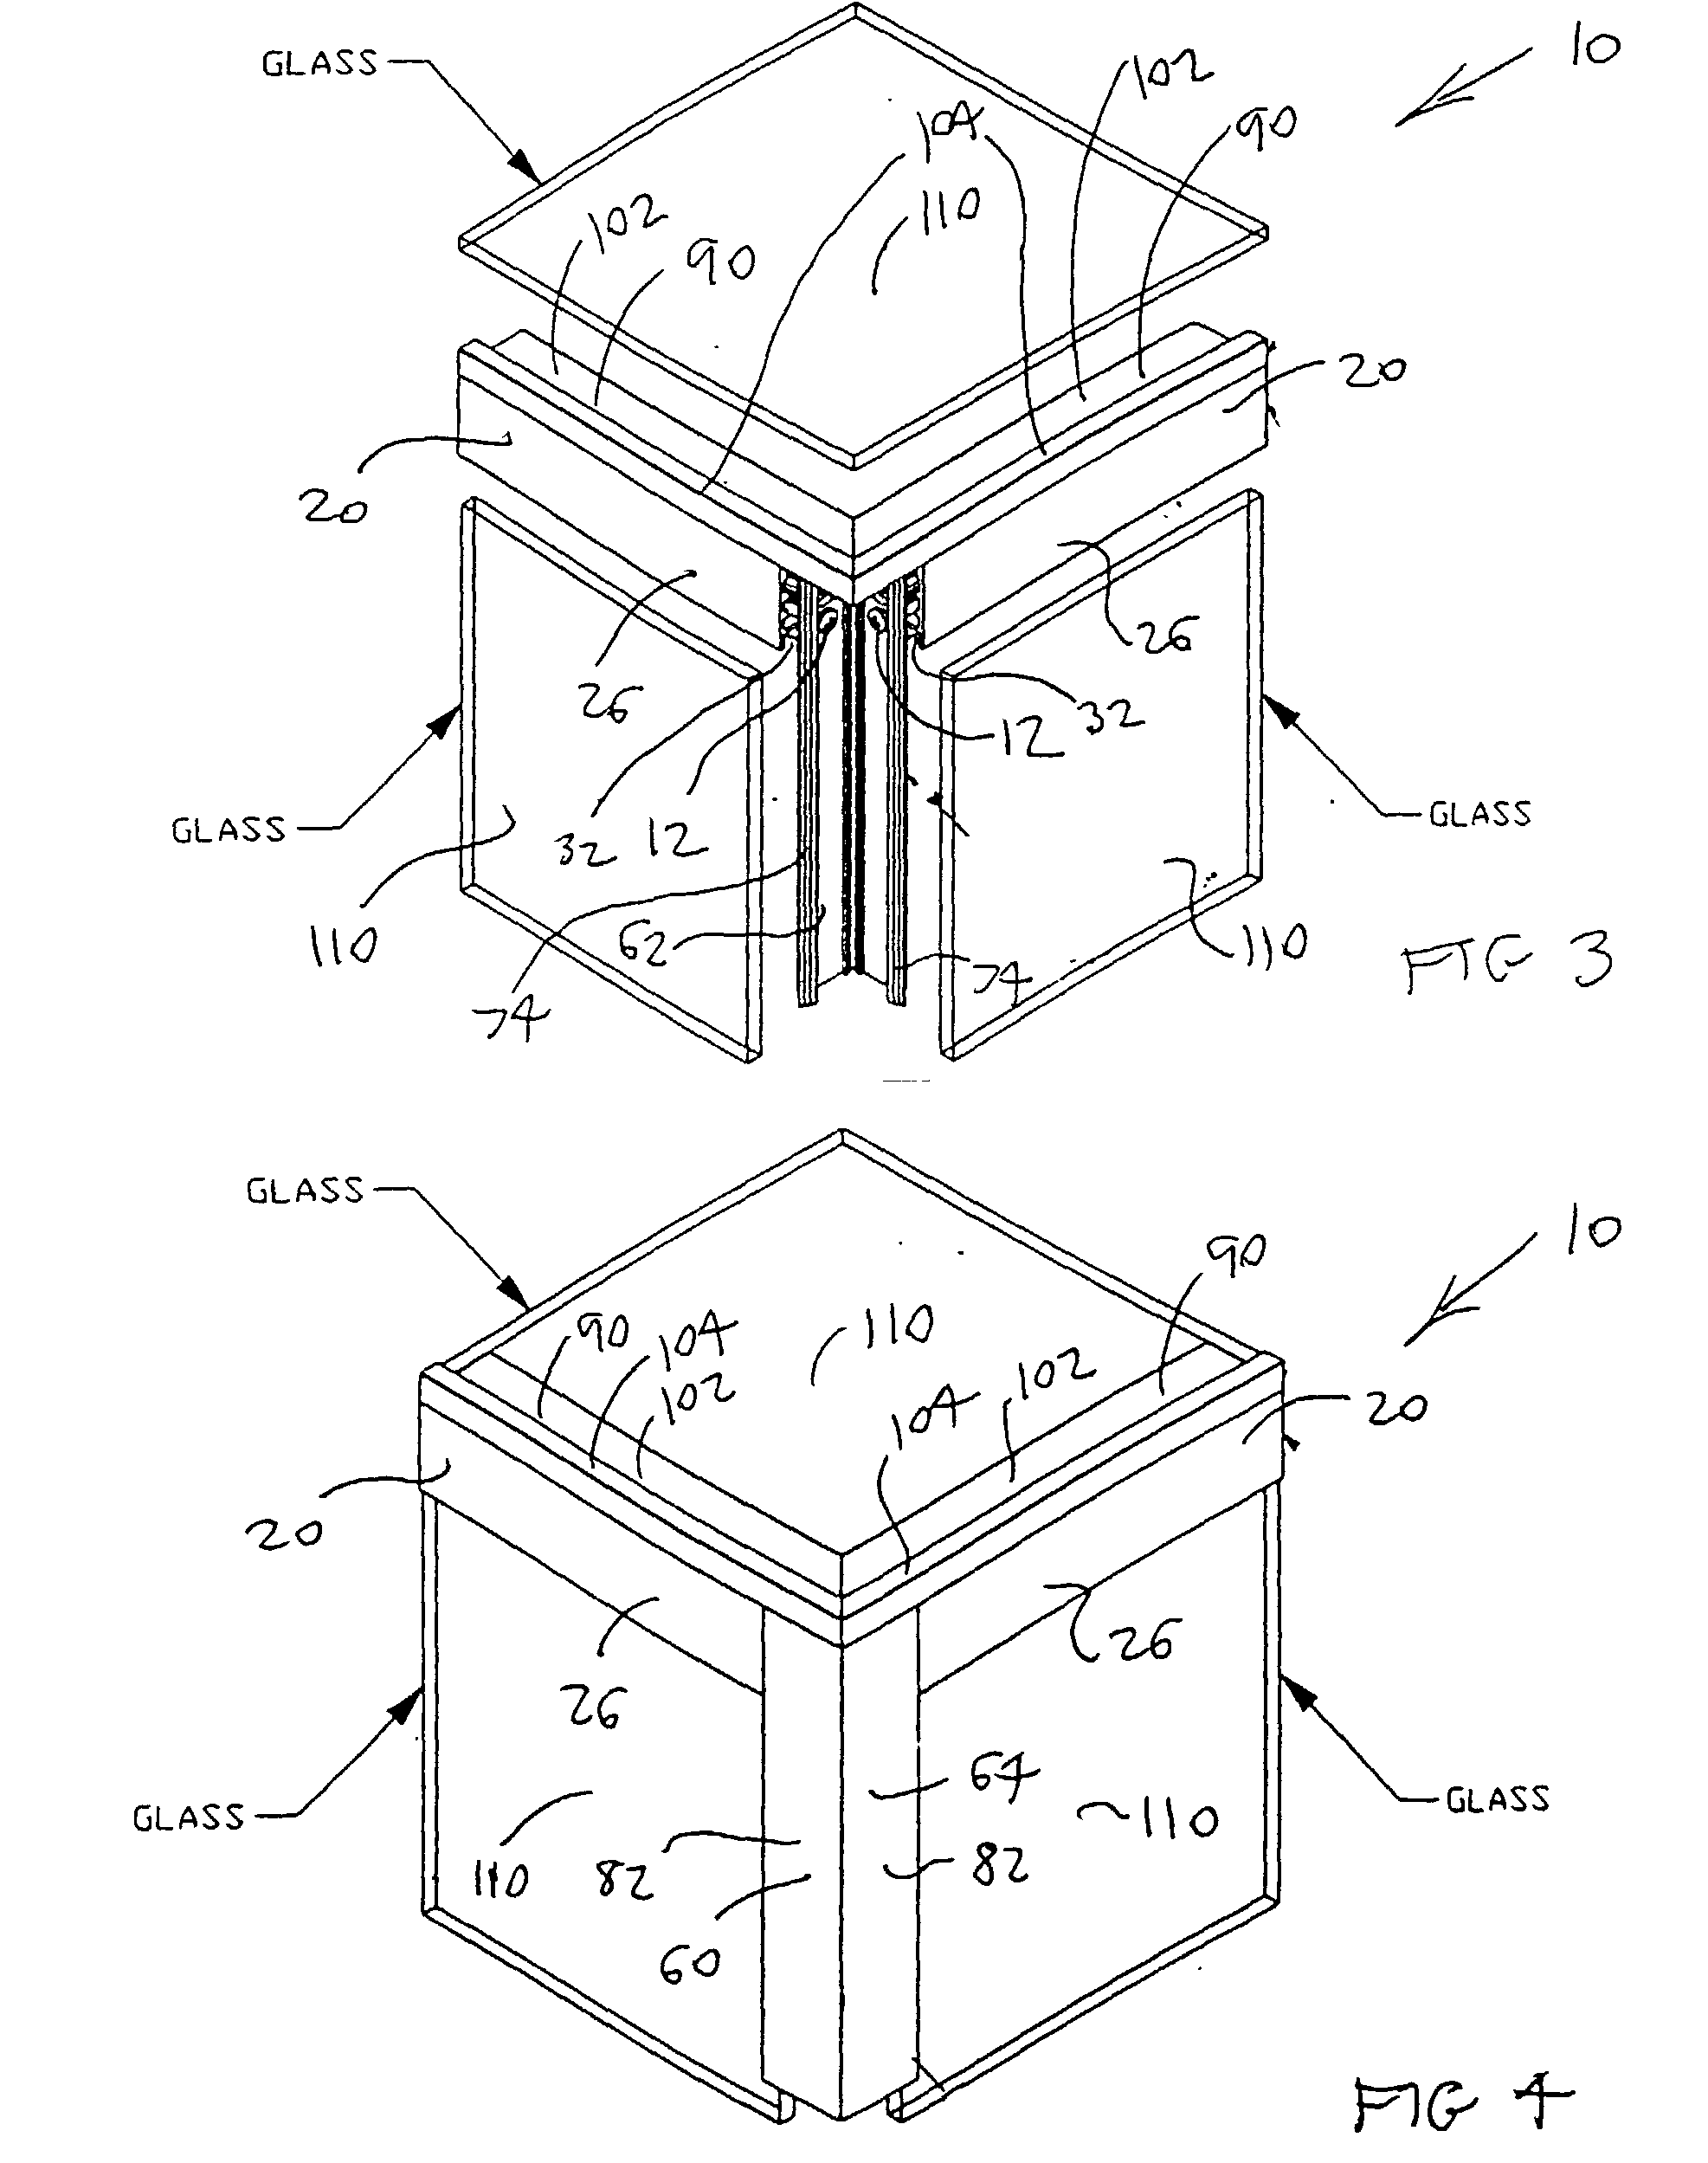 Display case assembly system